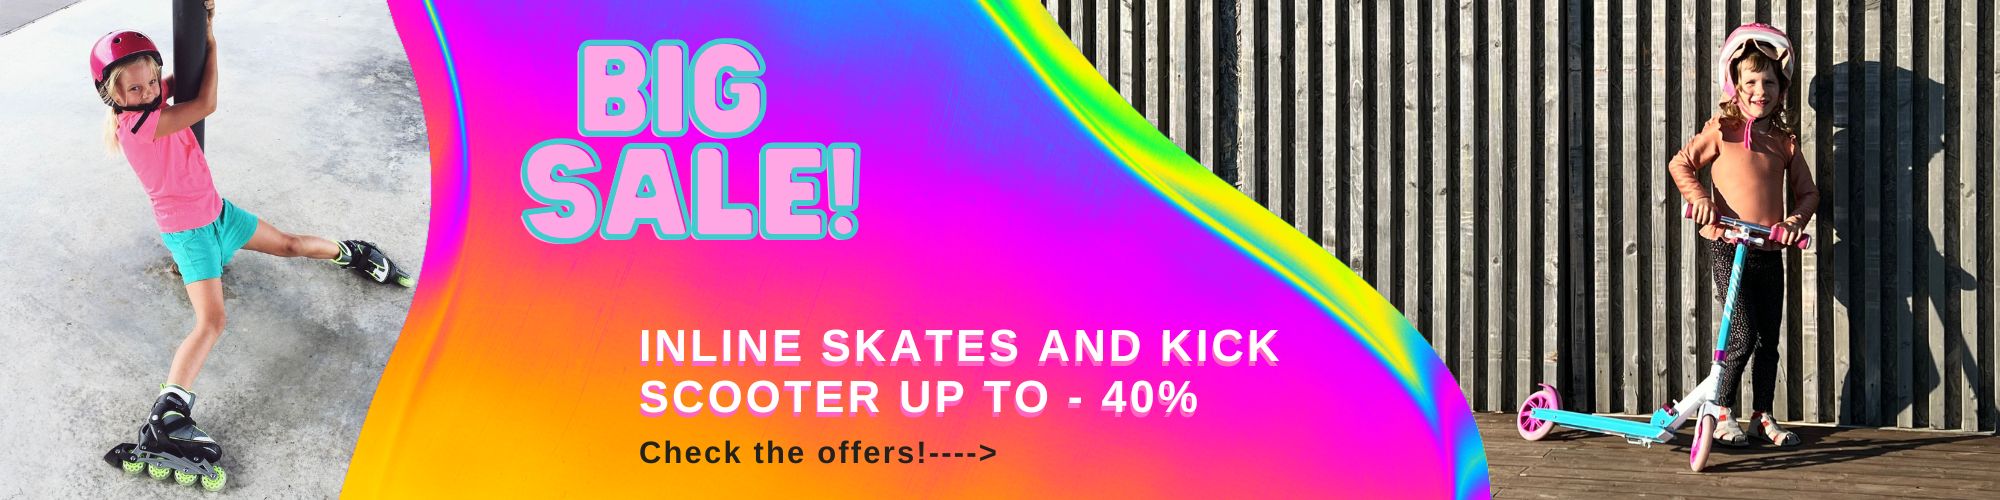 Kick Scooters with discount up to -40%